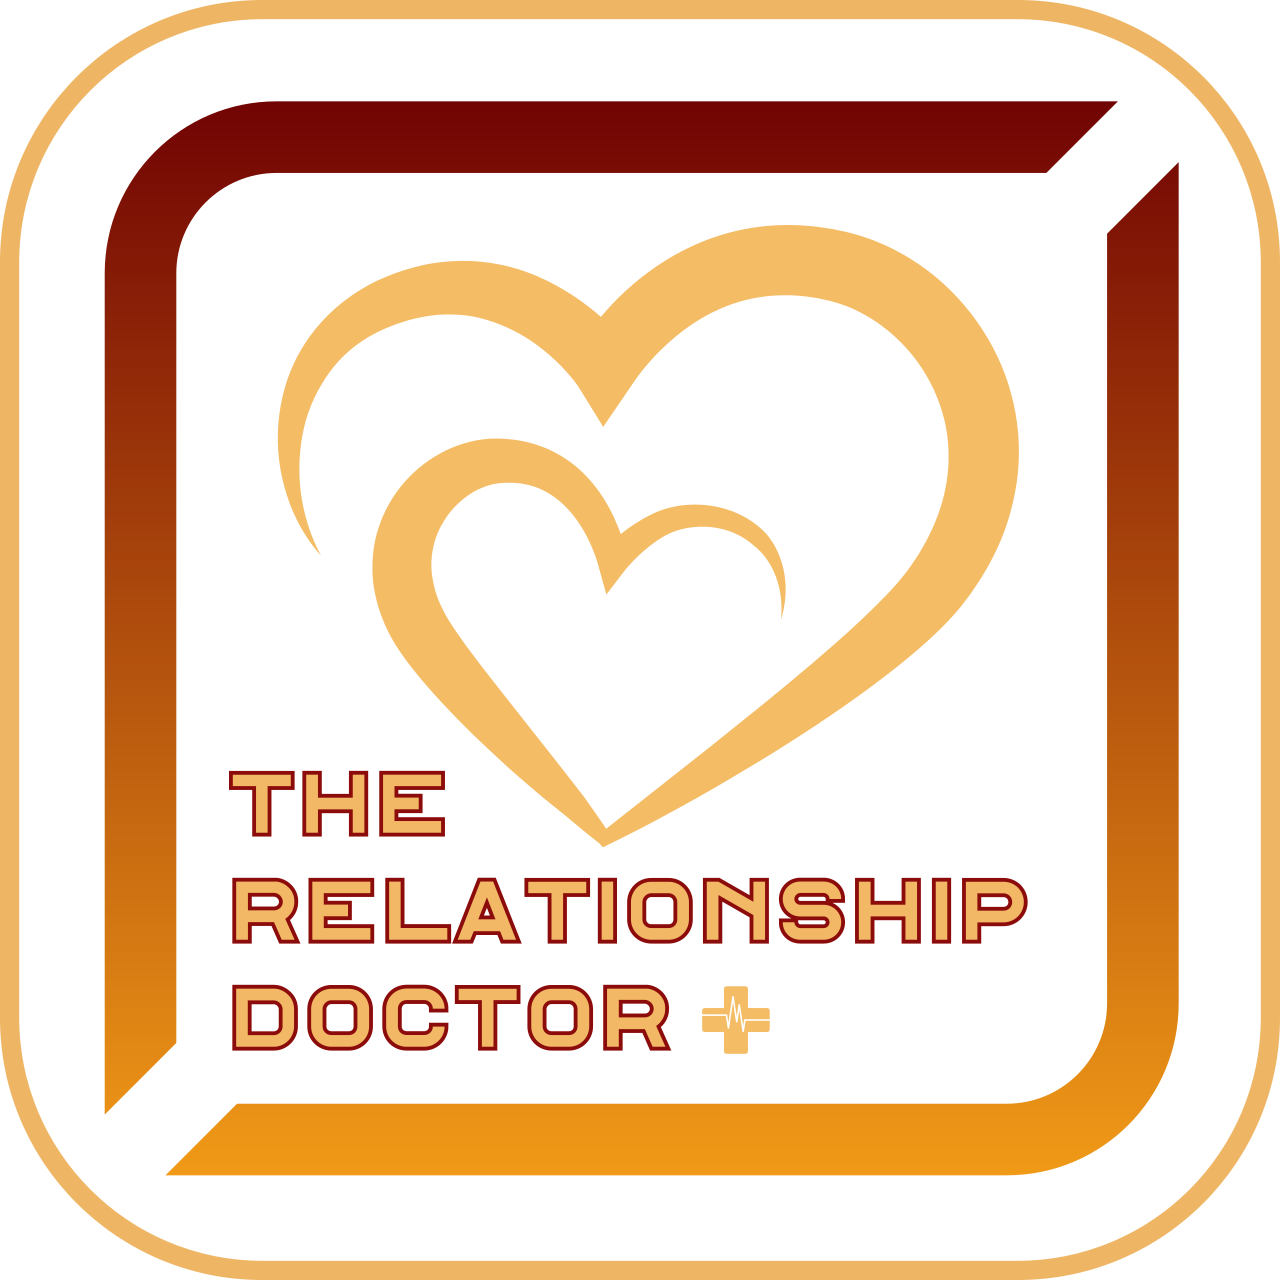 The Relationship Doctor's logo